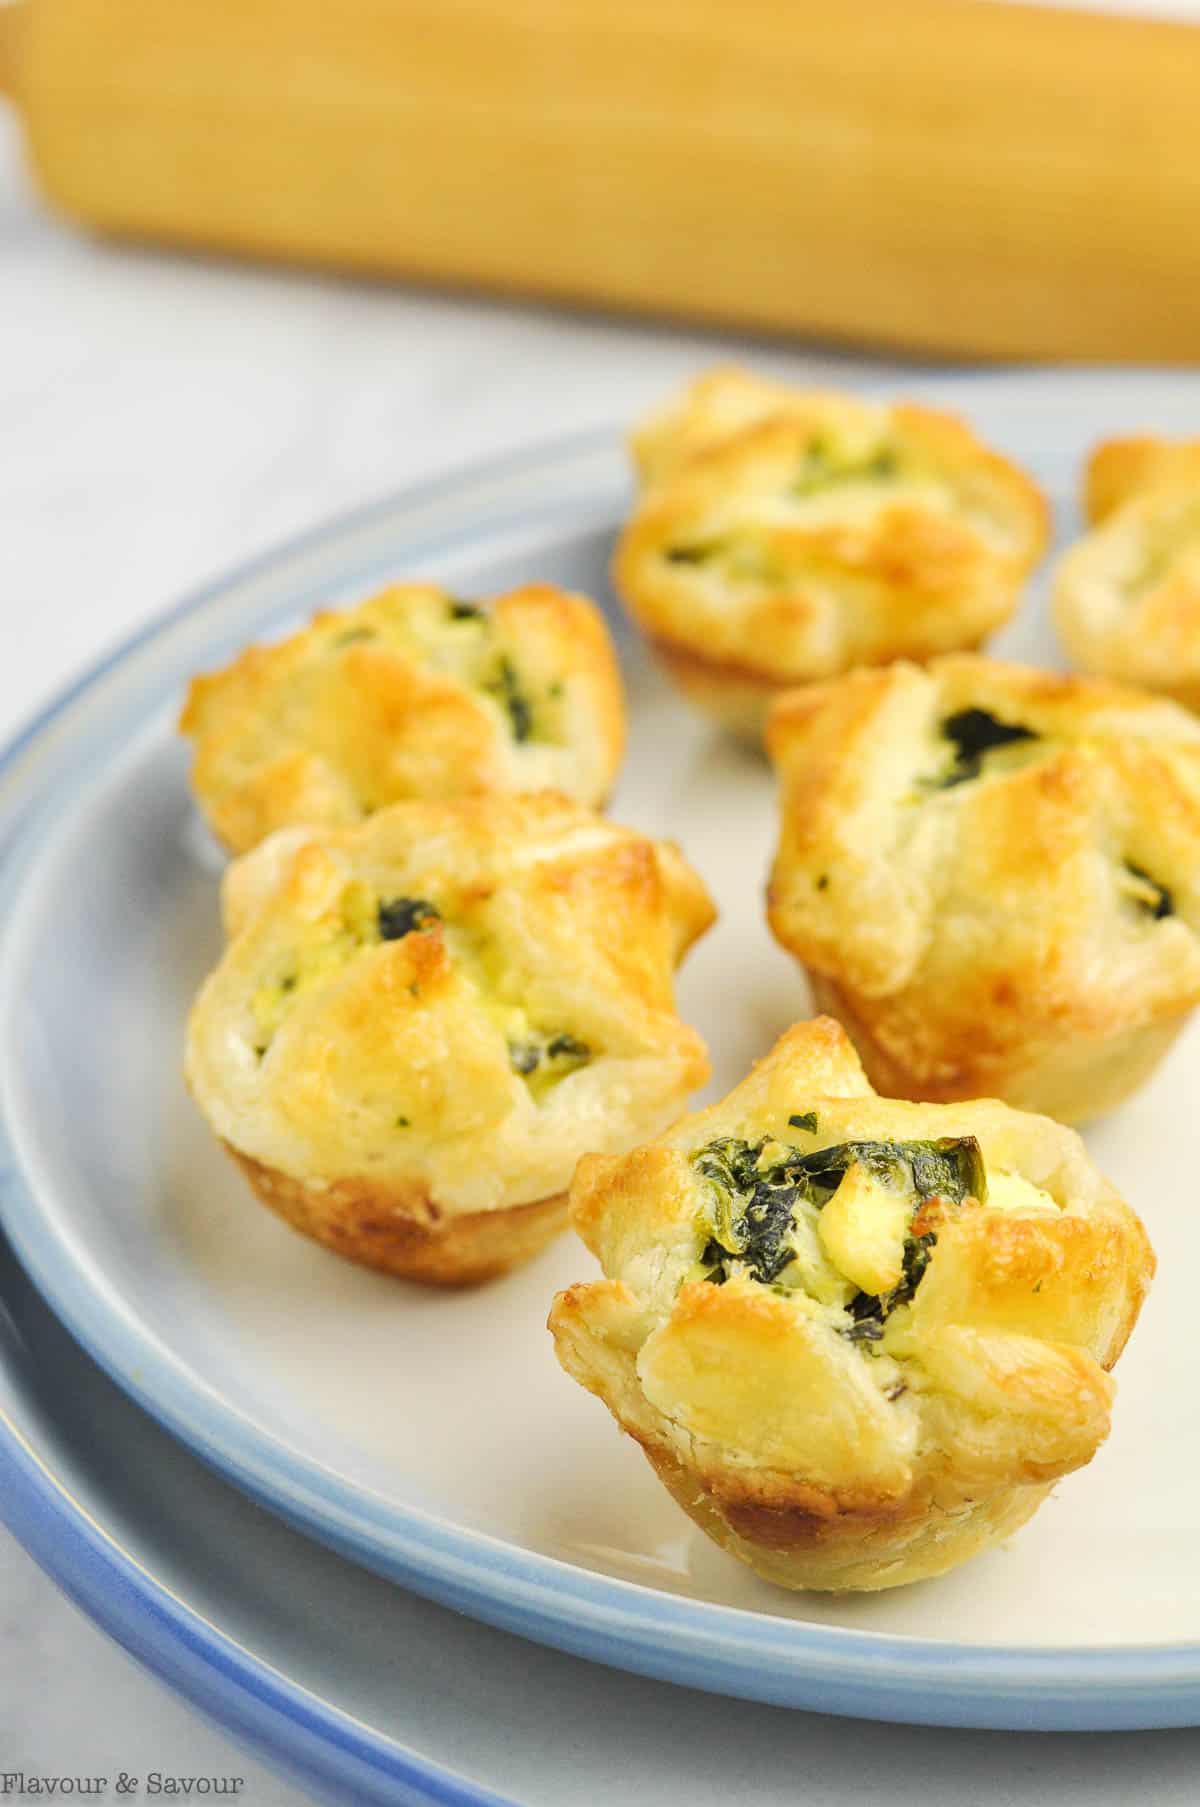 Buttery puff pastry filled with spinach, artichokes and cheese in tiny puff pastry cups